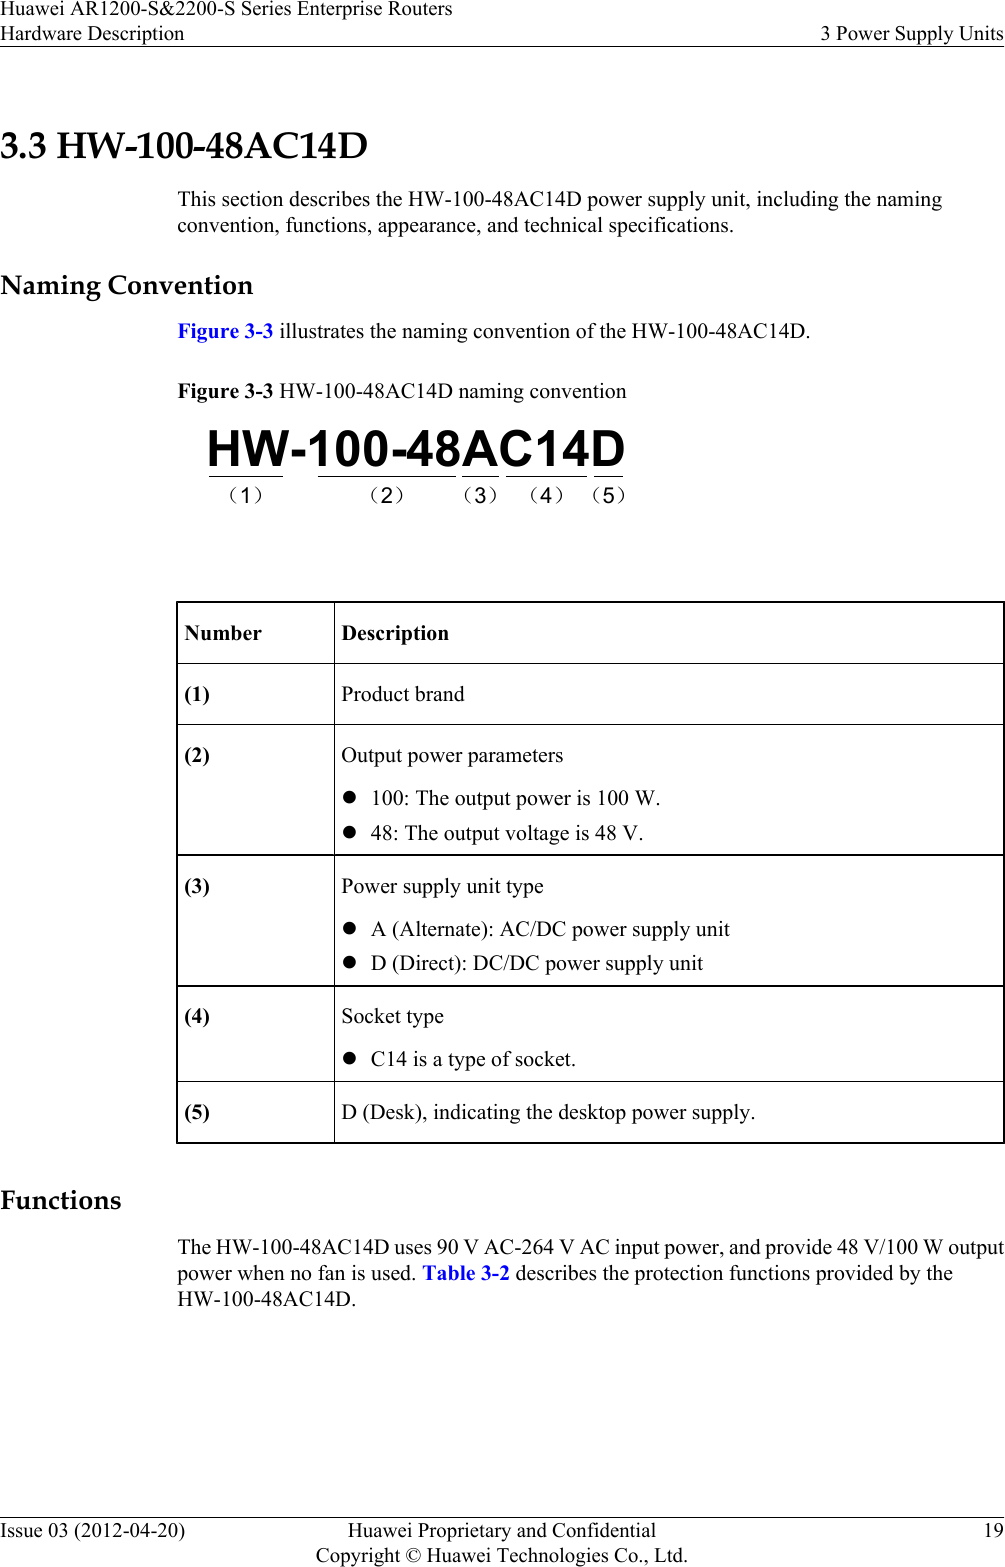 3.3 HW-100-48AC14DThis section describes the HW-100-48AC14D power supply unit, including the namingconvention, functions, appearance, and technical specifications.Naming ConventionFigure 3-3 illustrates the naming convention of the HW-100-48AC14D.Figure 3-3 HW-100-48AC14D naming conventionHW-100-48AC14D（1） （2） （3） （4） （5） Number Description(1) Product brand(2) Output power parametersl100: The output power is 100 W.l48: The output voltage is 48 V.(3) Power supply unit typelA (Alternate): AC/DC power supply unitlD (Direct): DC/DC power supply unit(4) Socket typelC14 is a type of socket.(5) D (Desk), indicating the desktop power supply.FunctionsThe HW-100-48AC14D uses 90 V AC-264 V AC input power, and provide 48 V/100 W outputpower when no fan is used. Table 3-2 describes the protection functions provided by theHW-100-48AC14D.Huawei AR1200-S&amp;2200-S Series Enterprise RoutersHardware Description 3 Power Supply UnitsIssue 03 (2012-04-20) Huawei Proprietary and ConfidentialCopyright © Huawei Technologies Co., Ltd.19